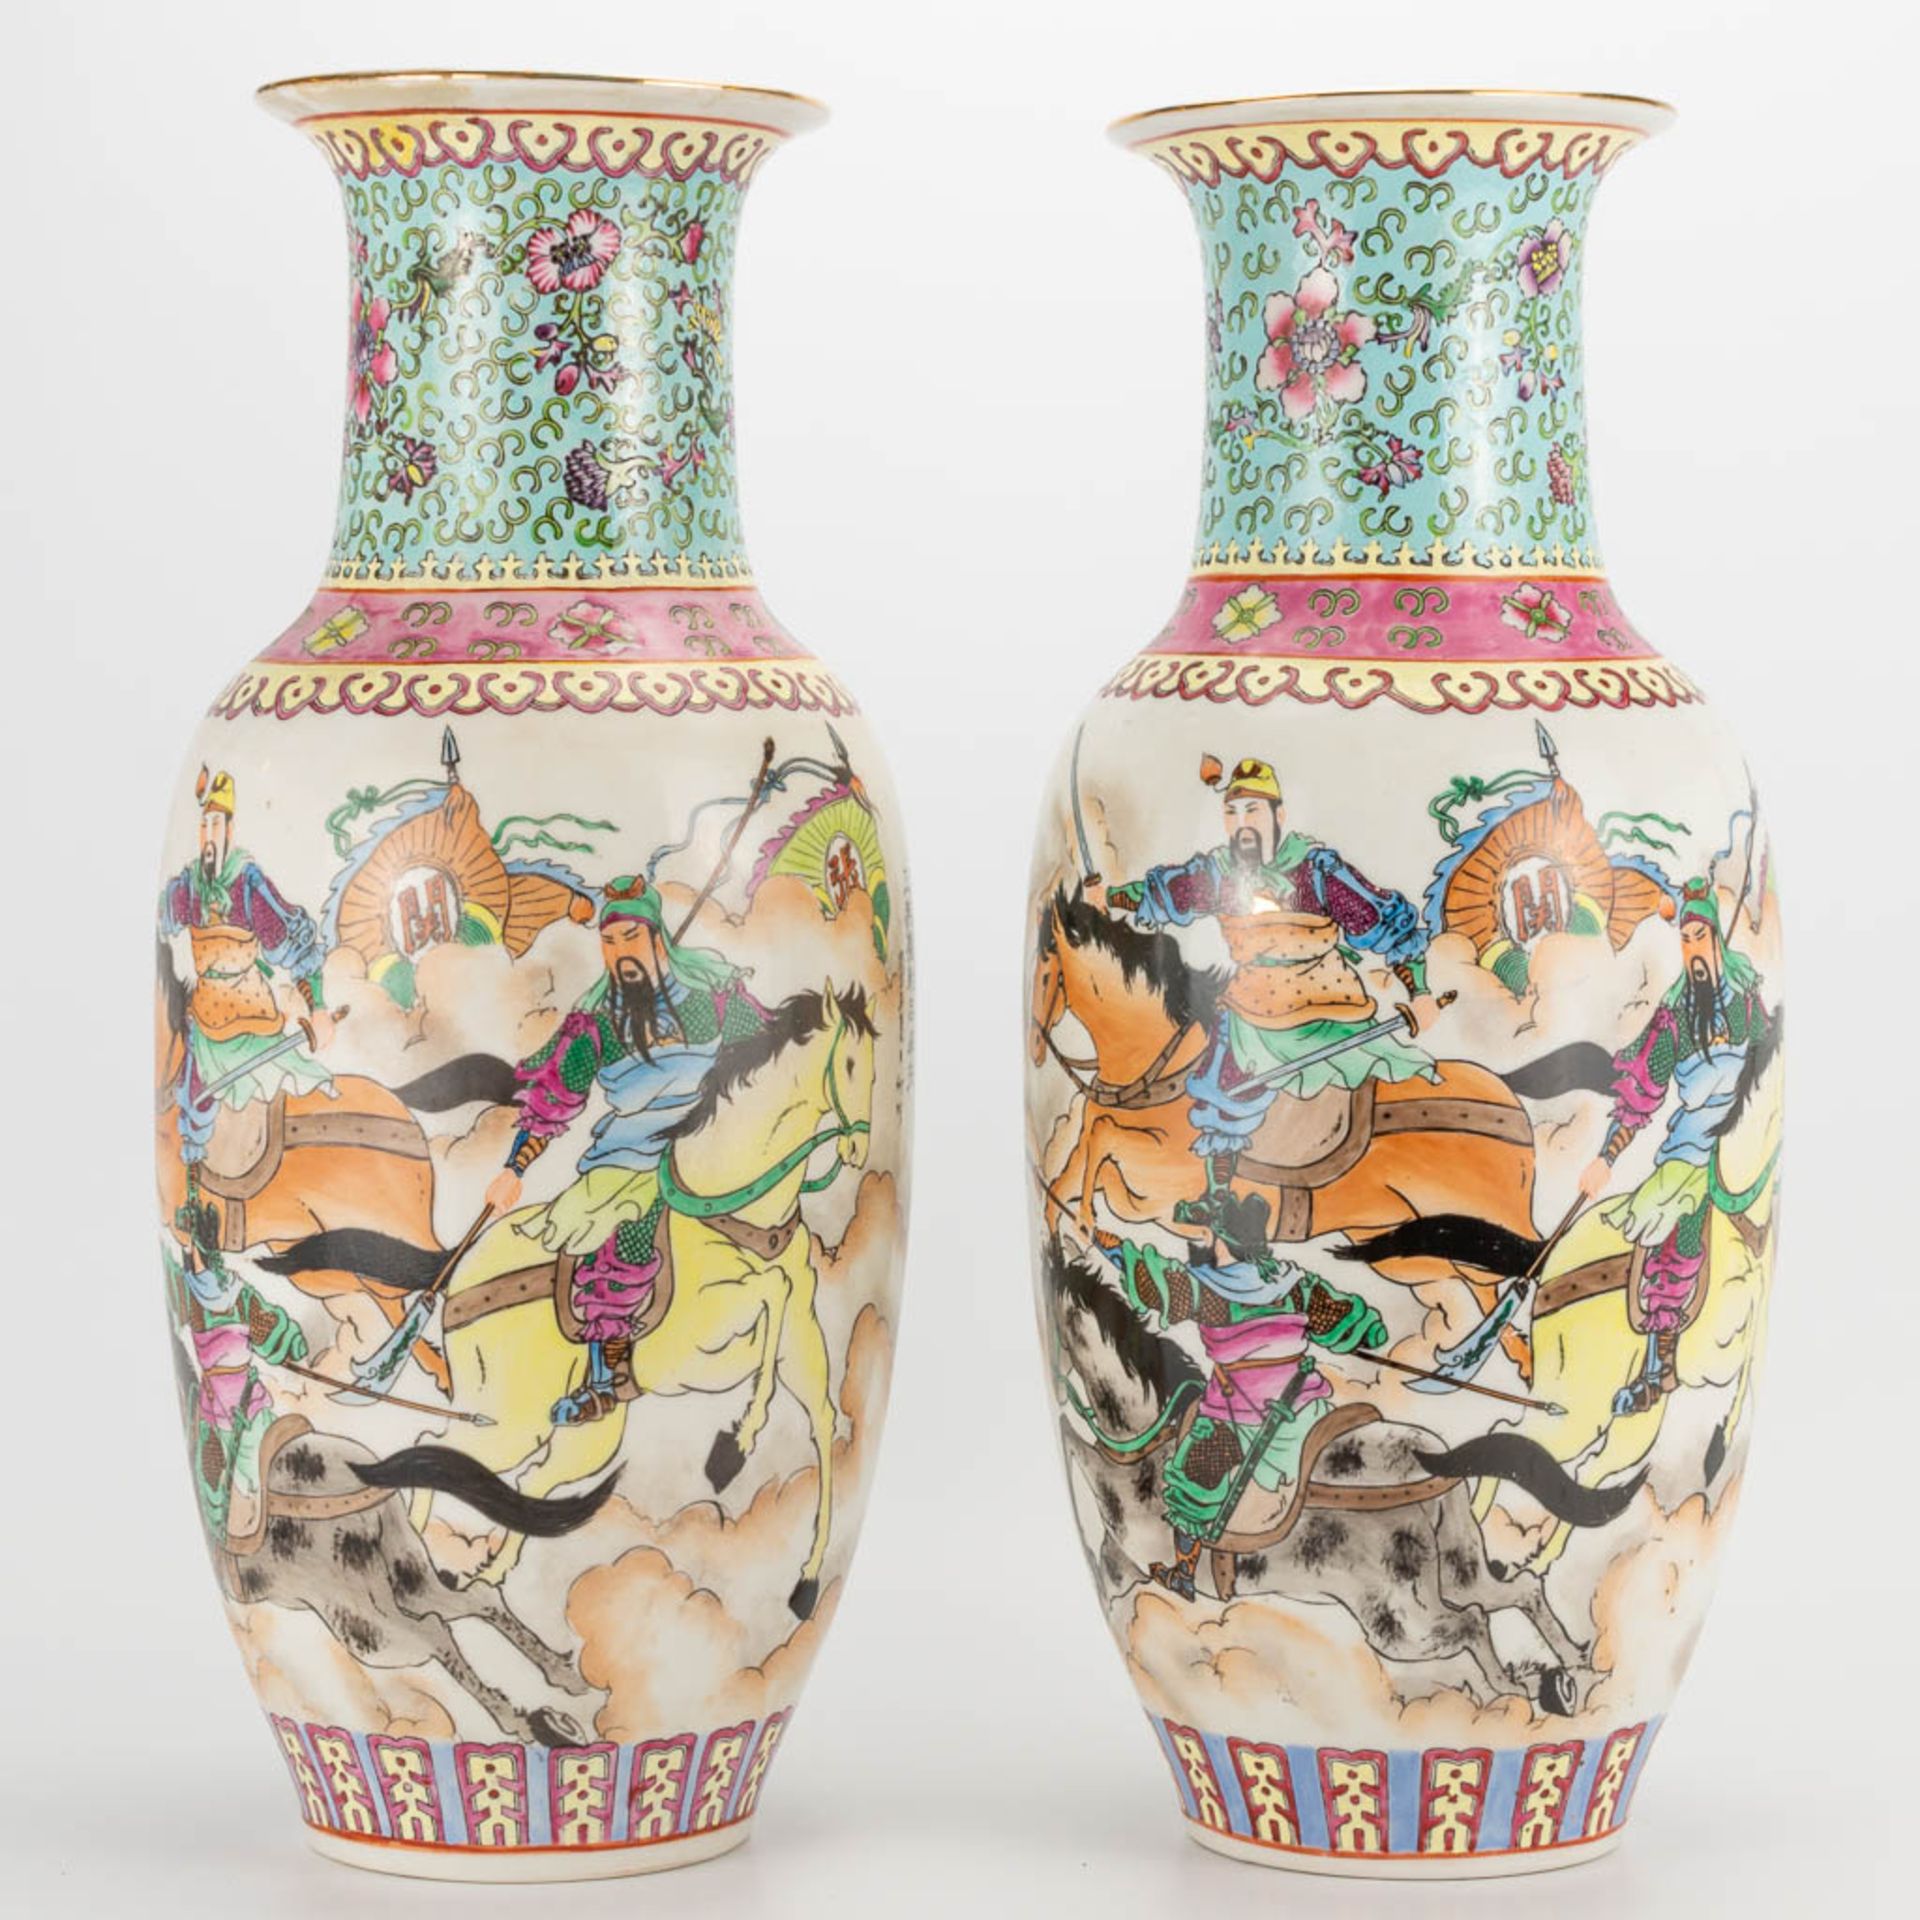 A pair of vases made of Chinese porcelain with decors of knights. 20th century. (46 x 18 cm) - Image 16 of 27